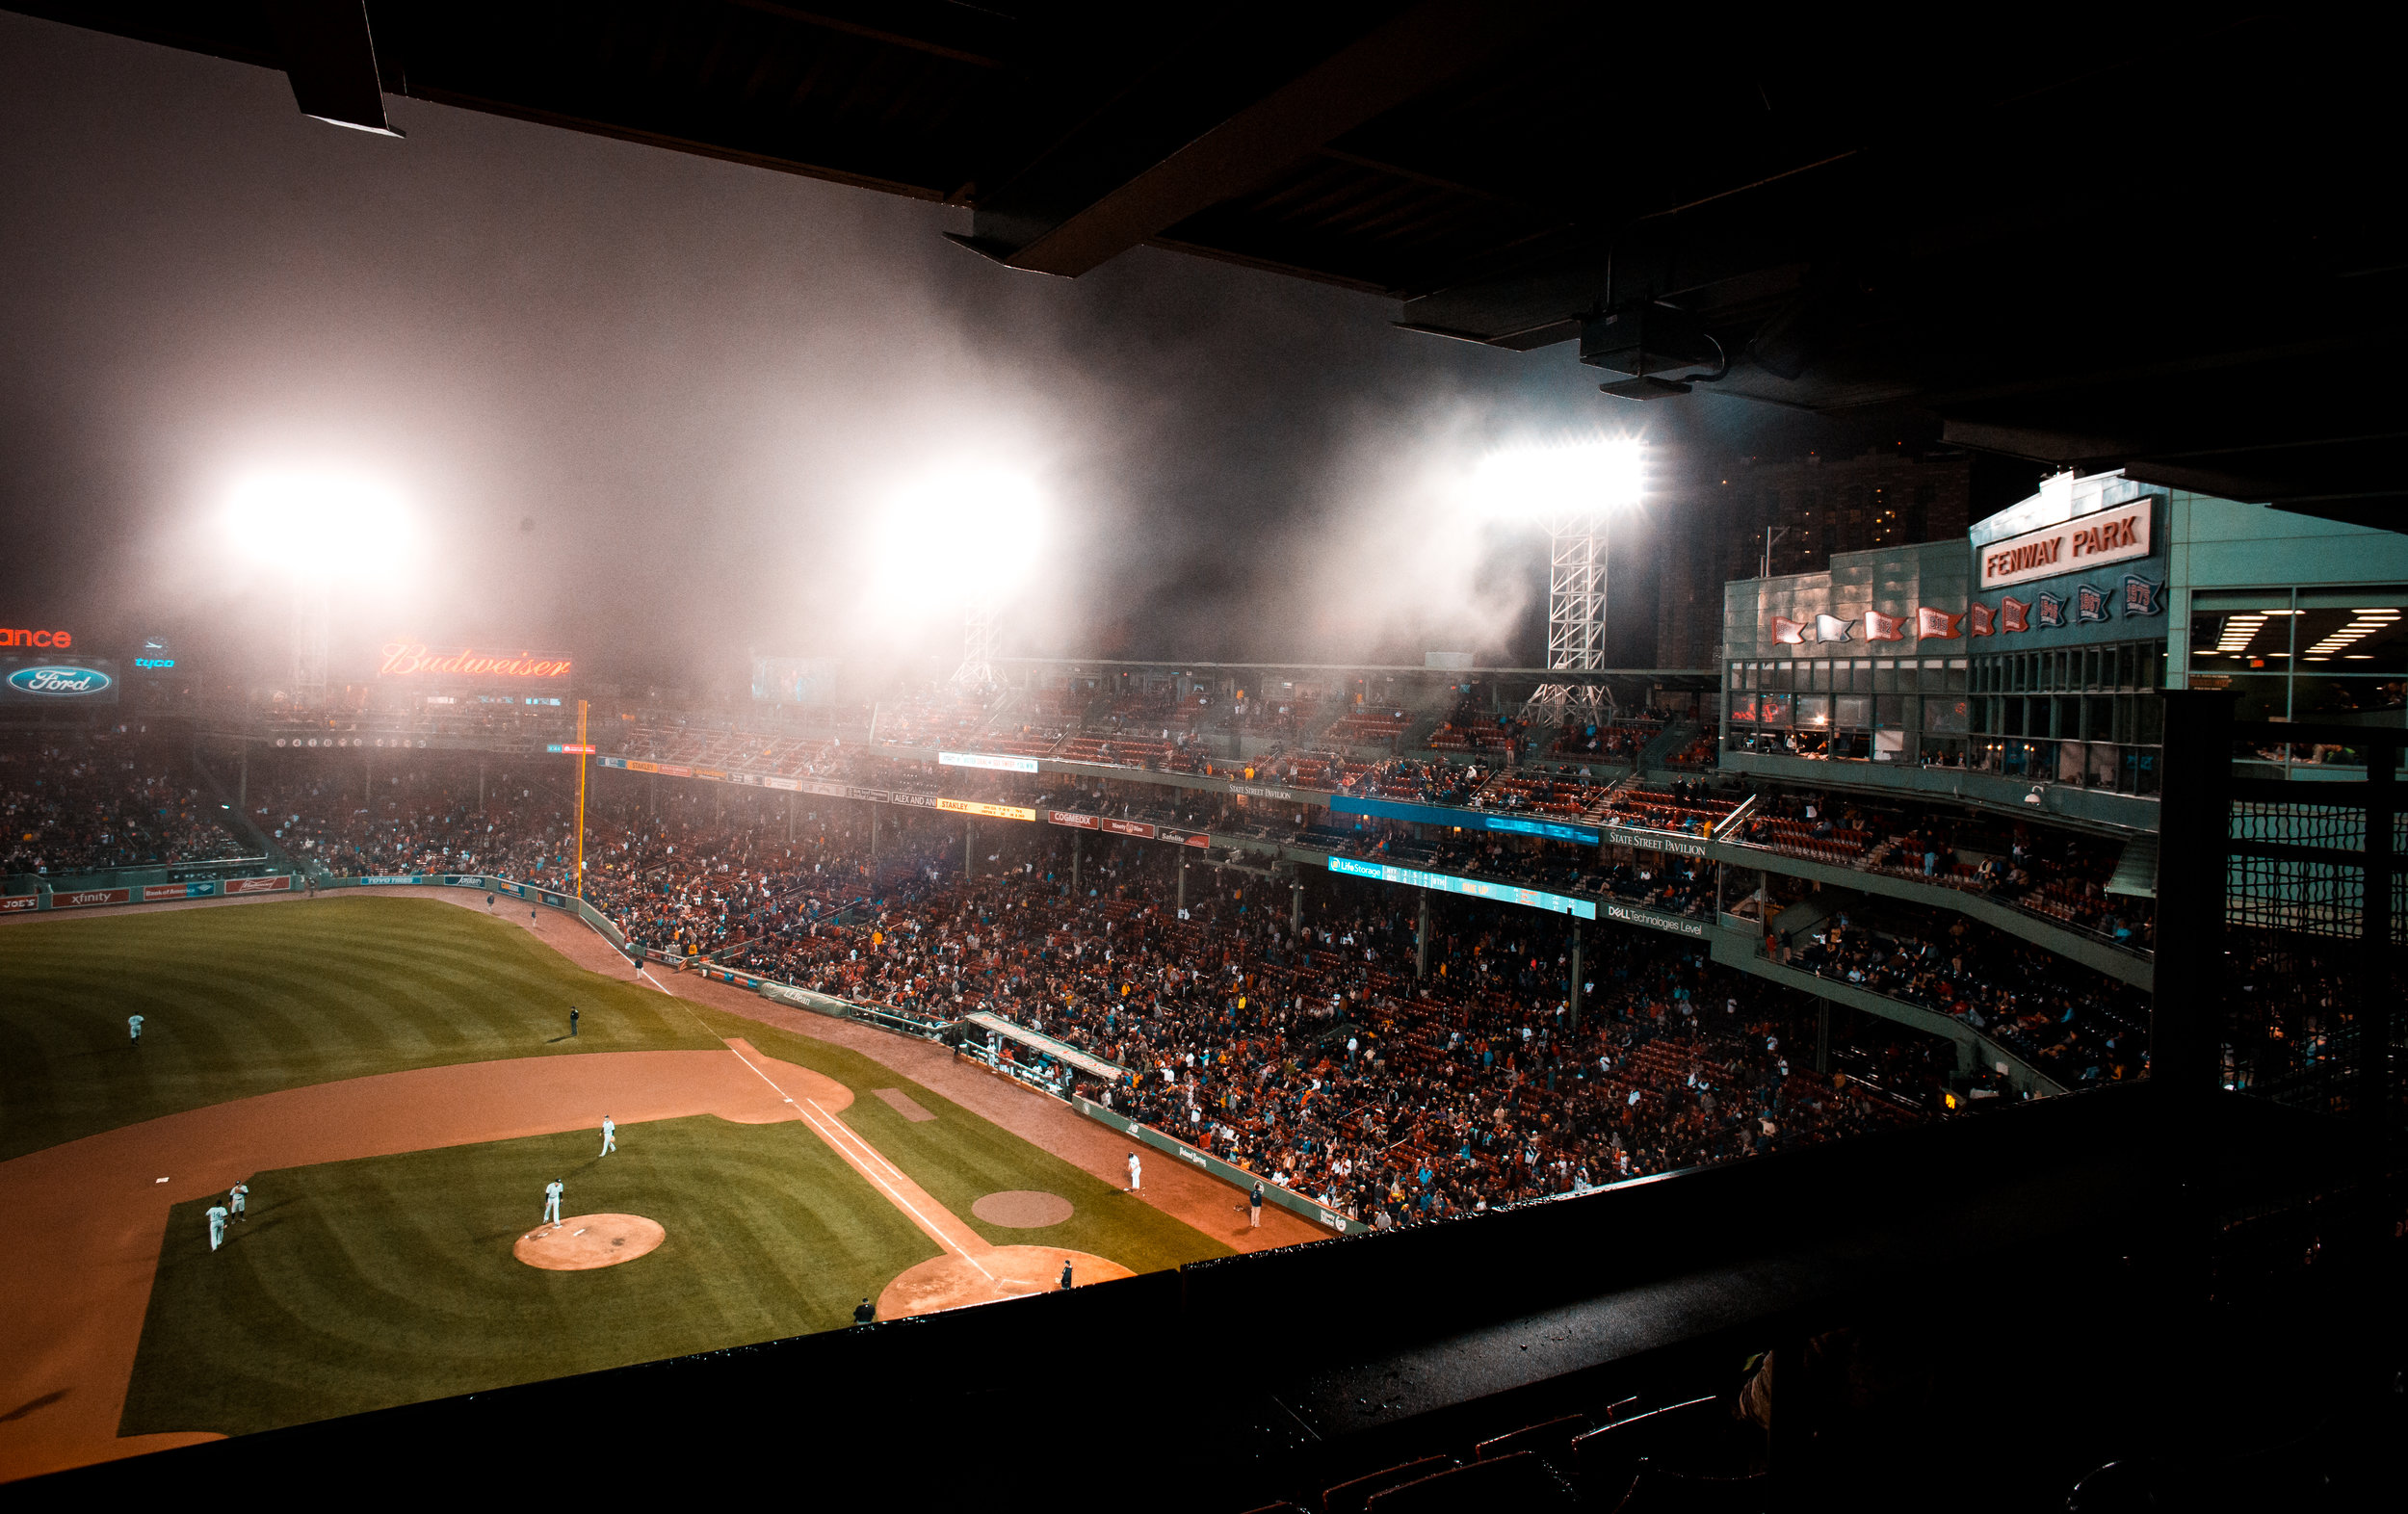 Fenway Park in the Fog